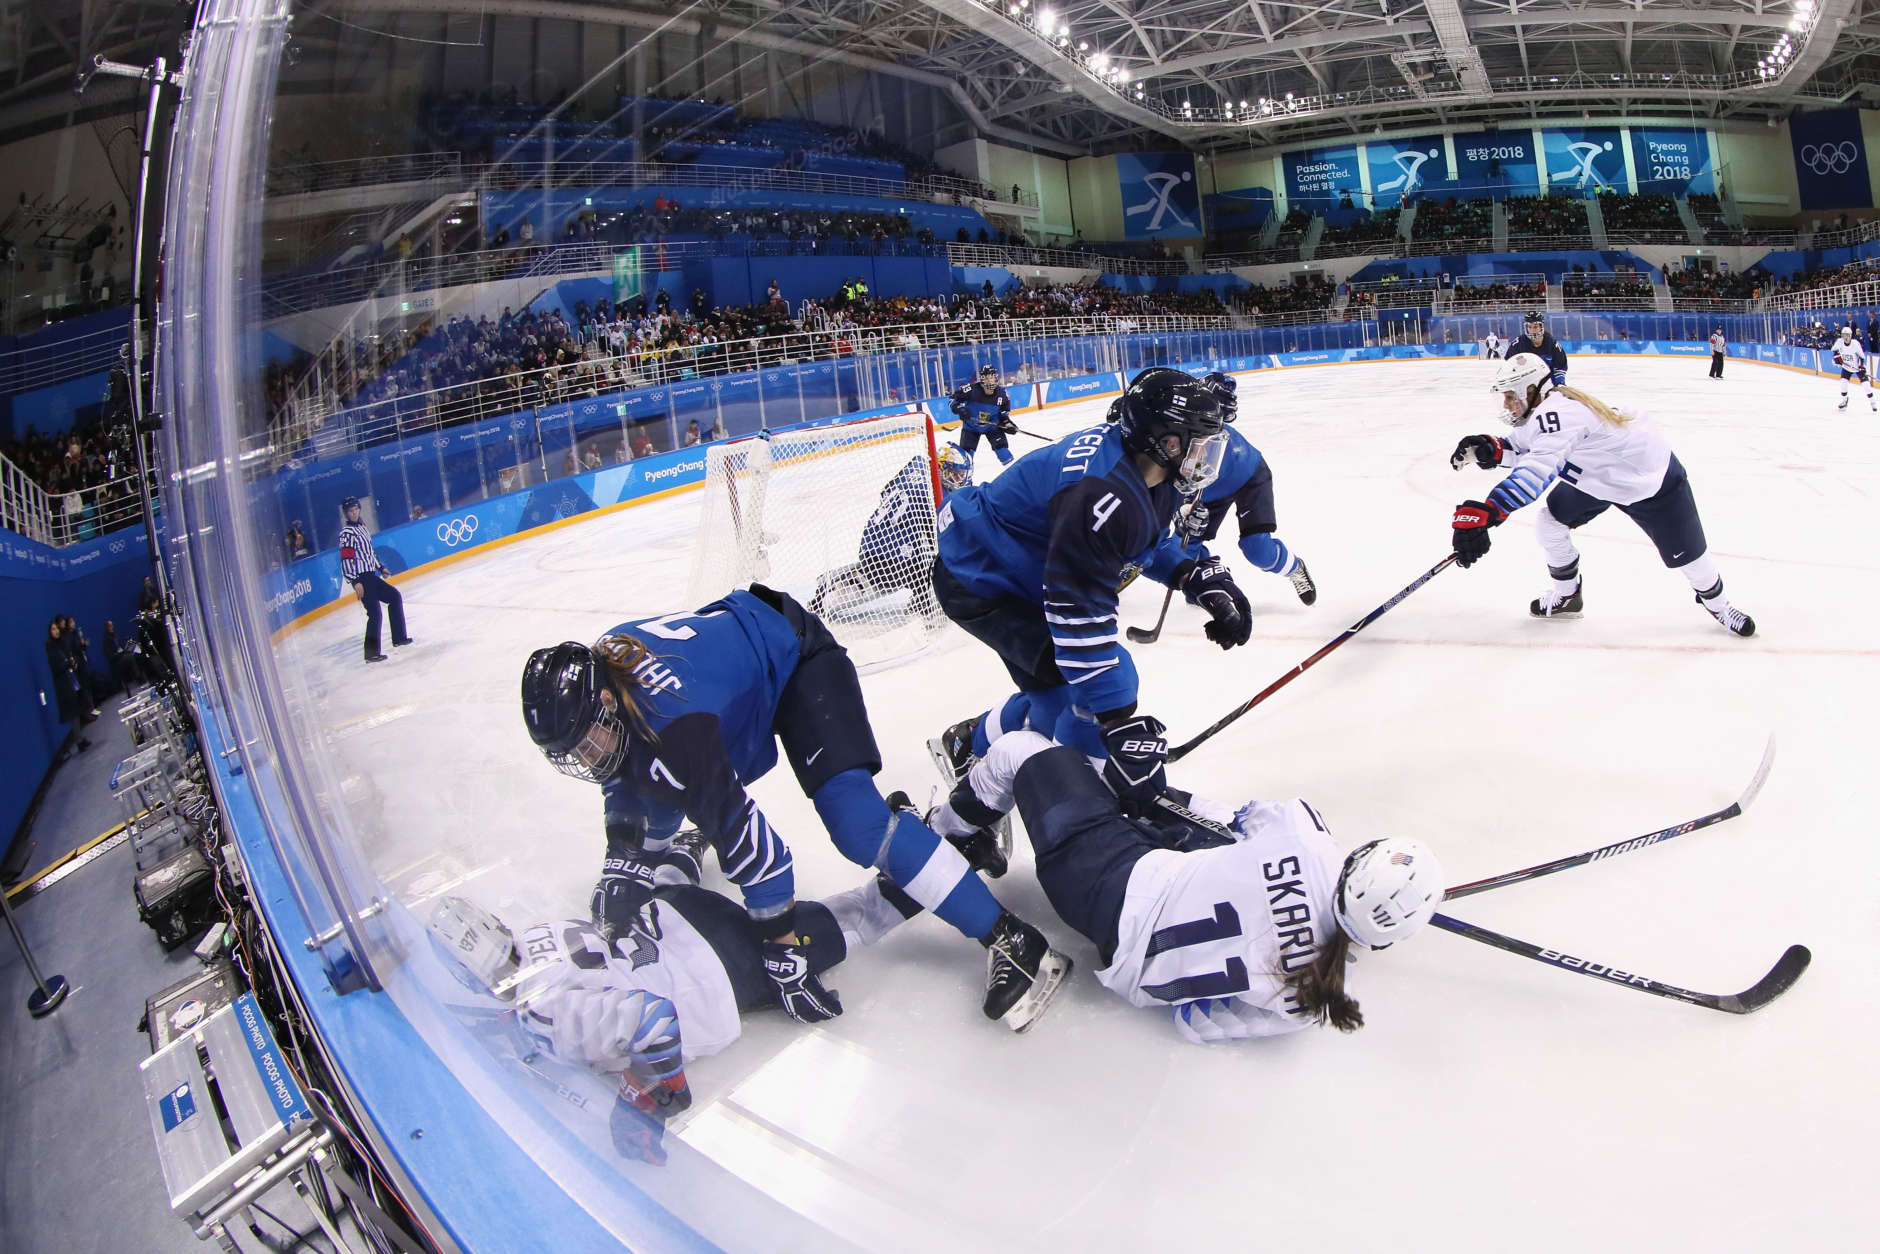 GANGNEUNG, SOUTH KOREA - FEBRUARY 11:  Amanda Pelkey #37 and Haley Skarupa #11 of the United States fall on the ice in the second period against Finland during the Women's Ice Hockey Preliminary Round - Group A game on day two of the PyeongChang 2018 Winter Olympic Games at Kwandong Hockey Centre on February 11, 2018 in Gangneung, South Korea.  (Photo by Bruce Bennett/Getty Images)